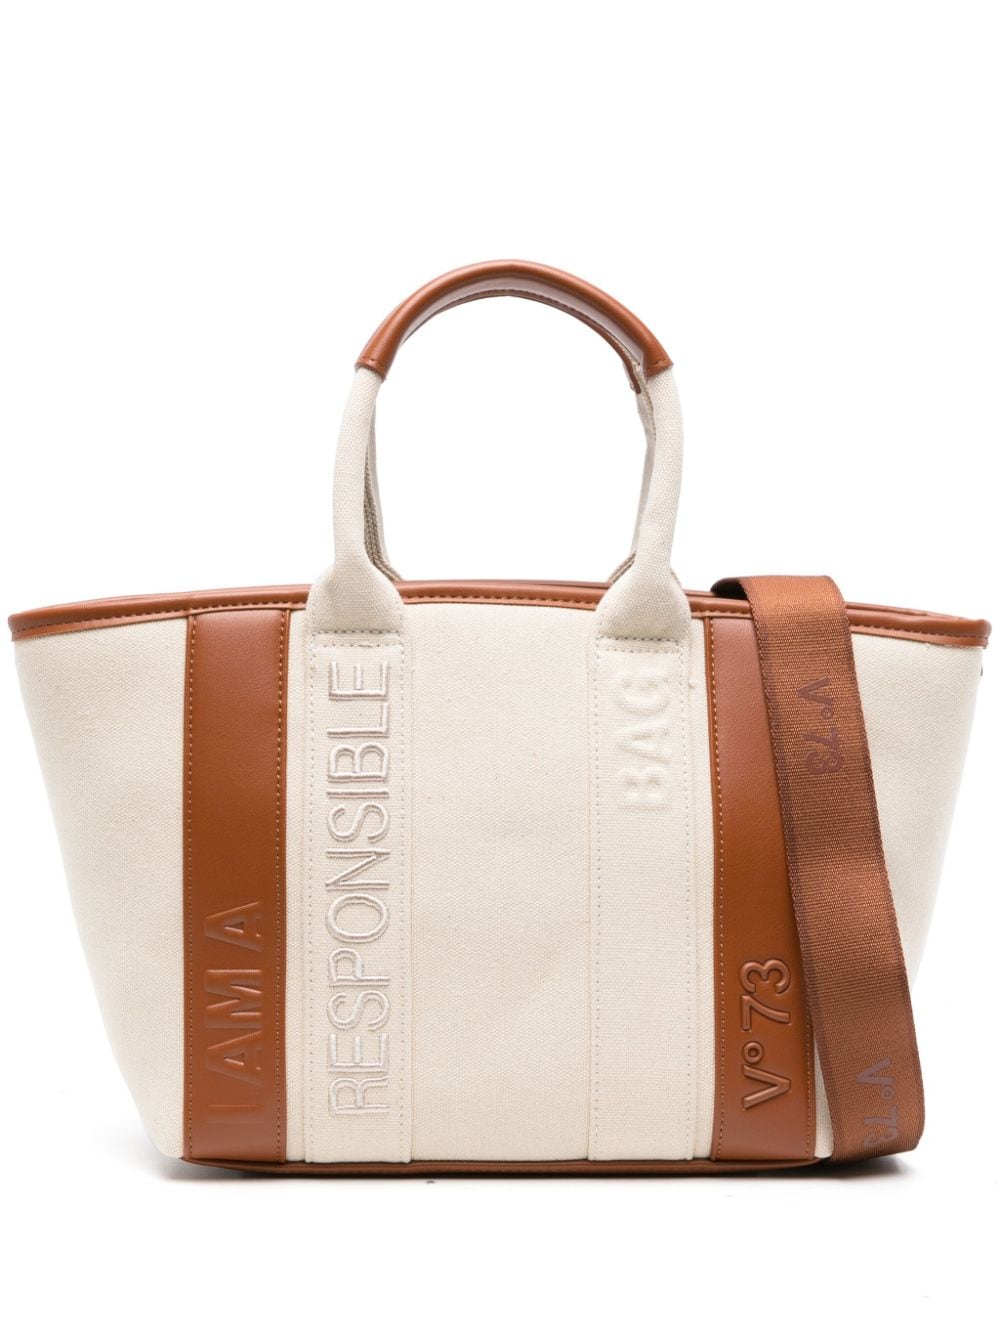 Responsibility Summe canvas tote bag